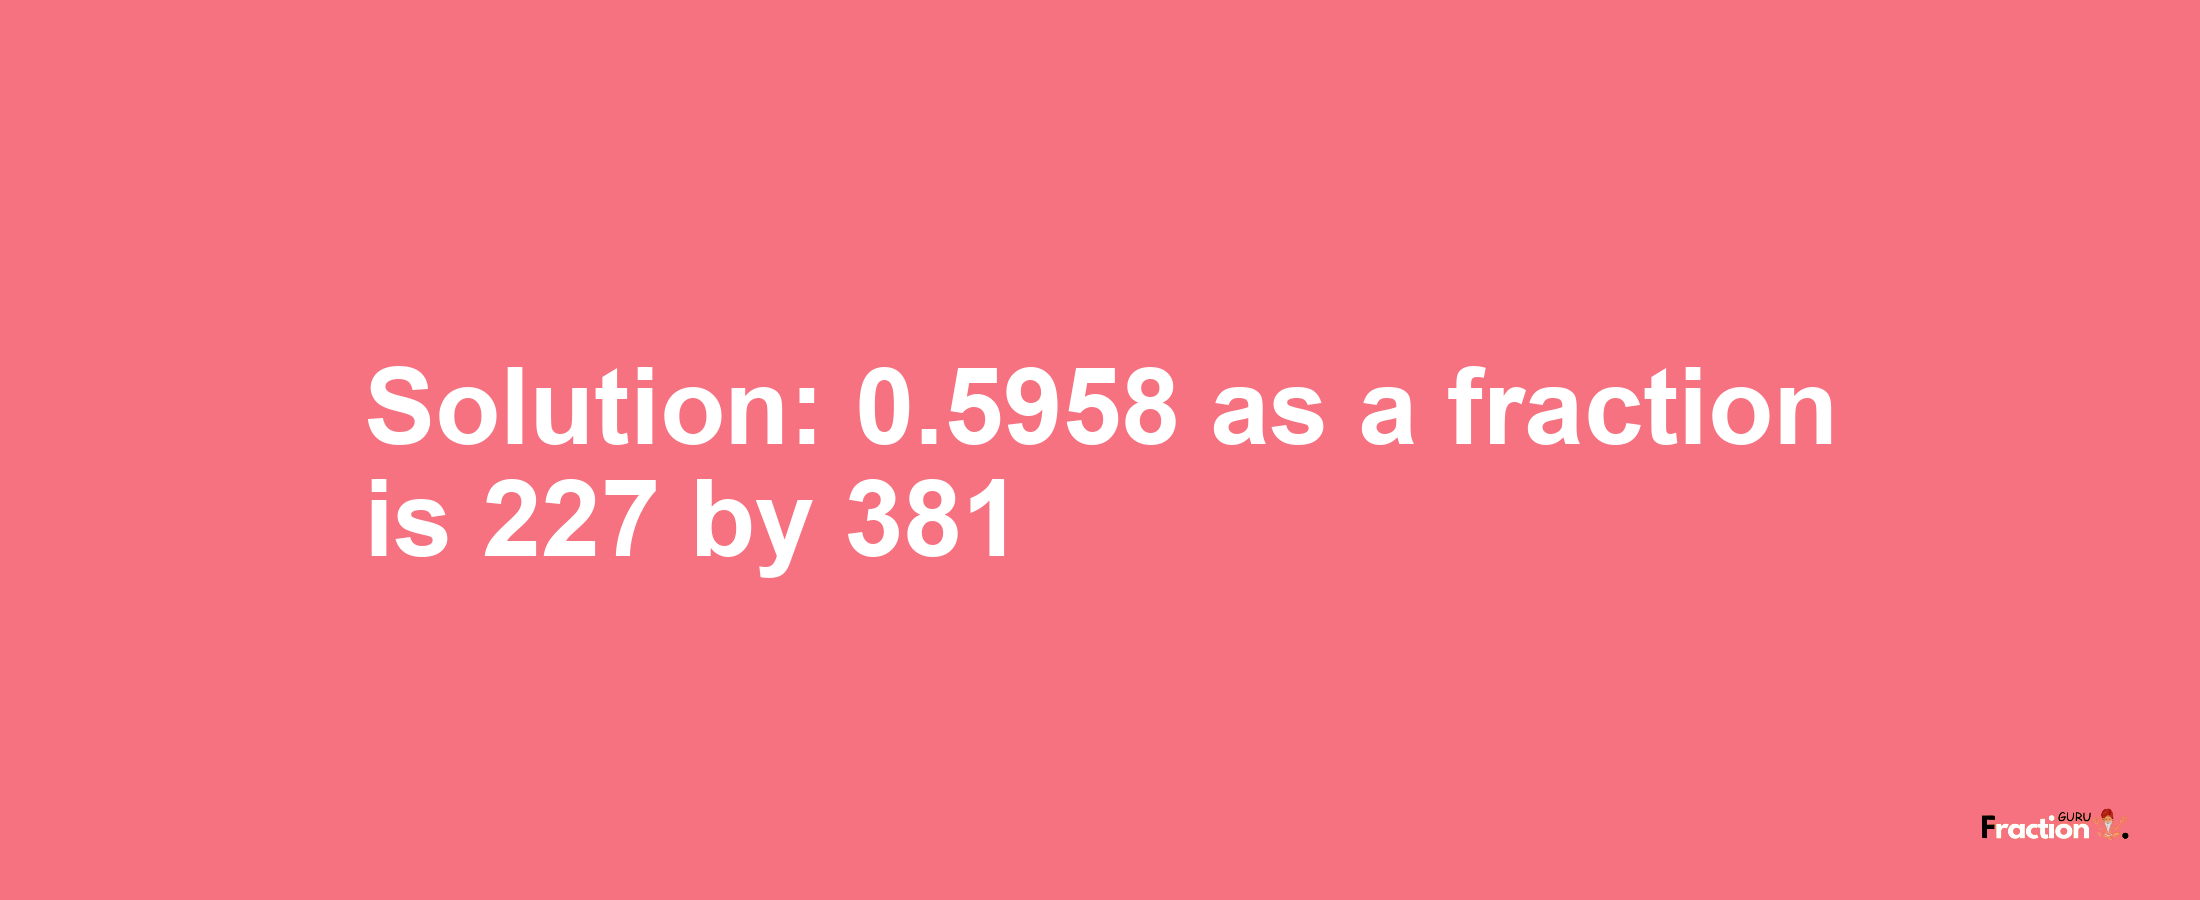 Solution:0.5958 as a fraction is 227/381